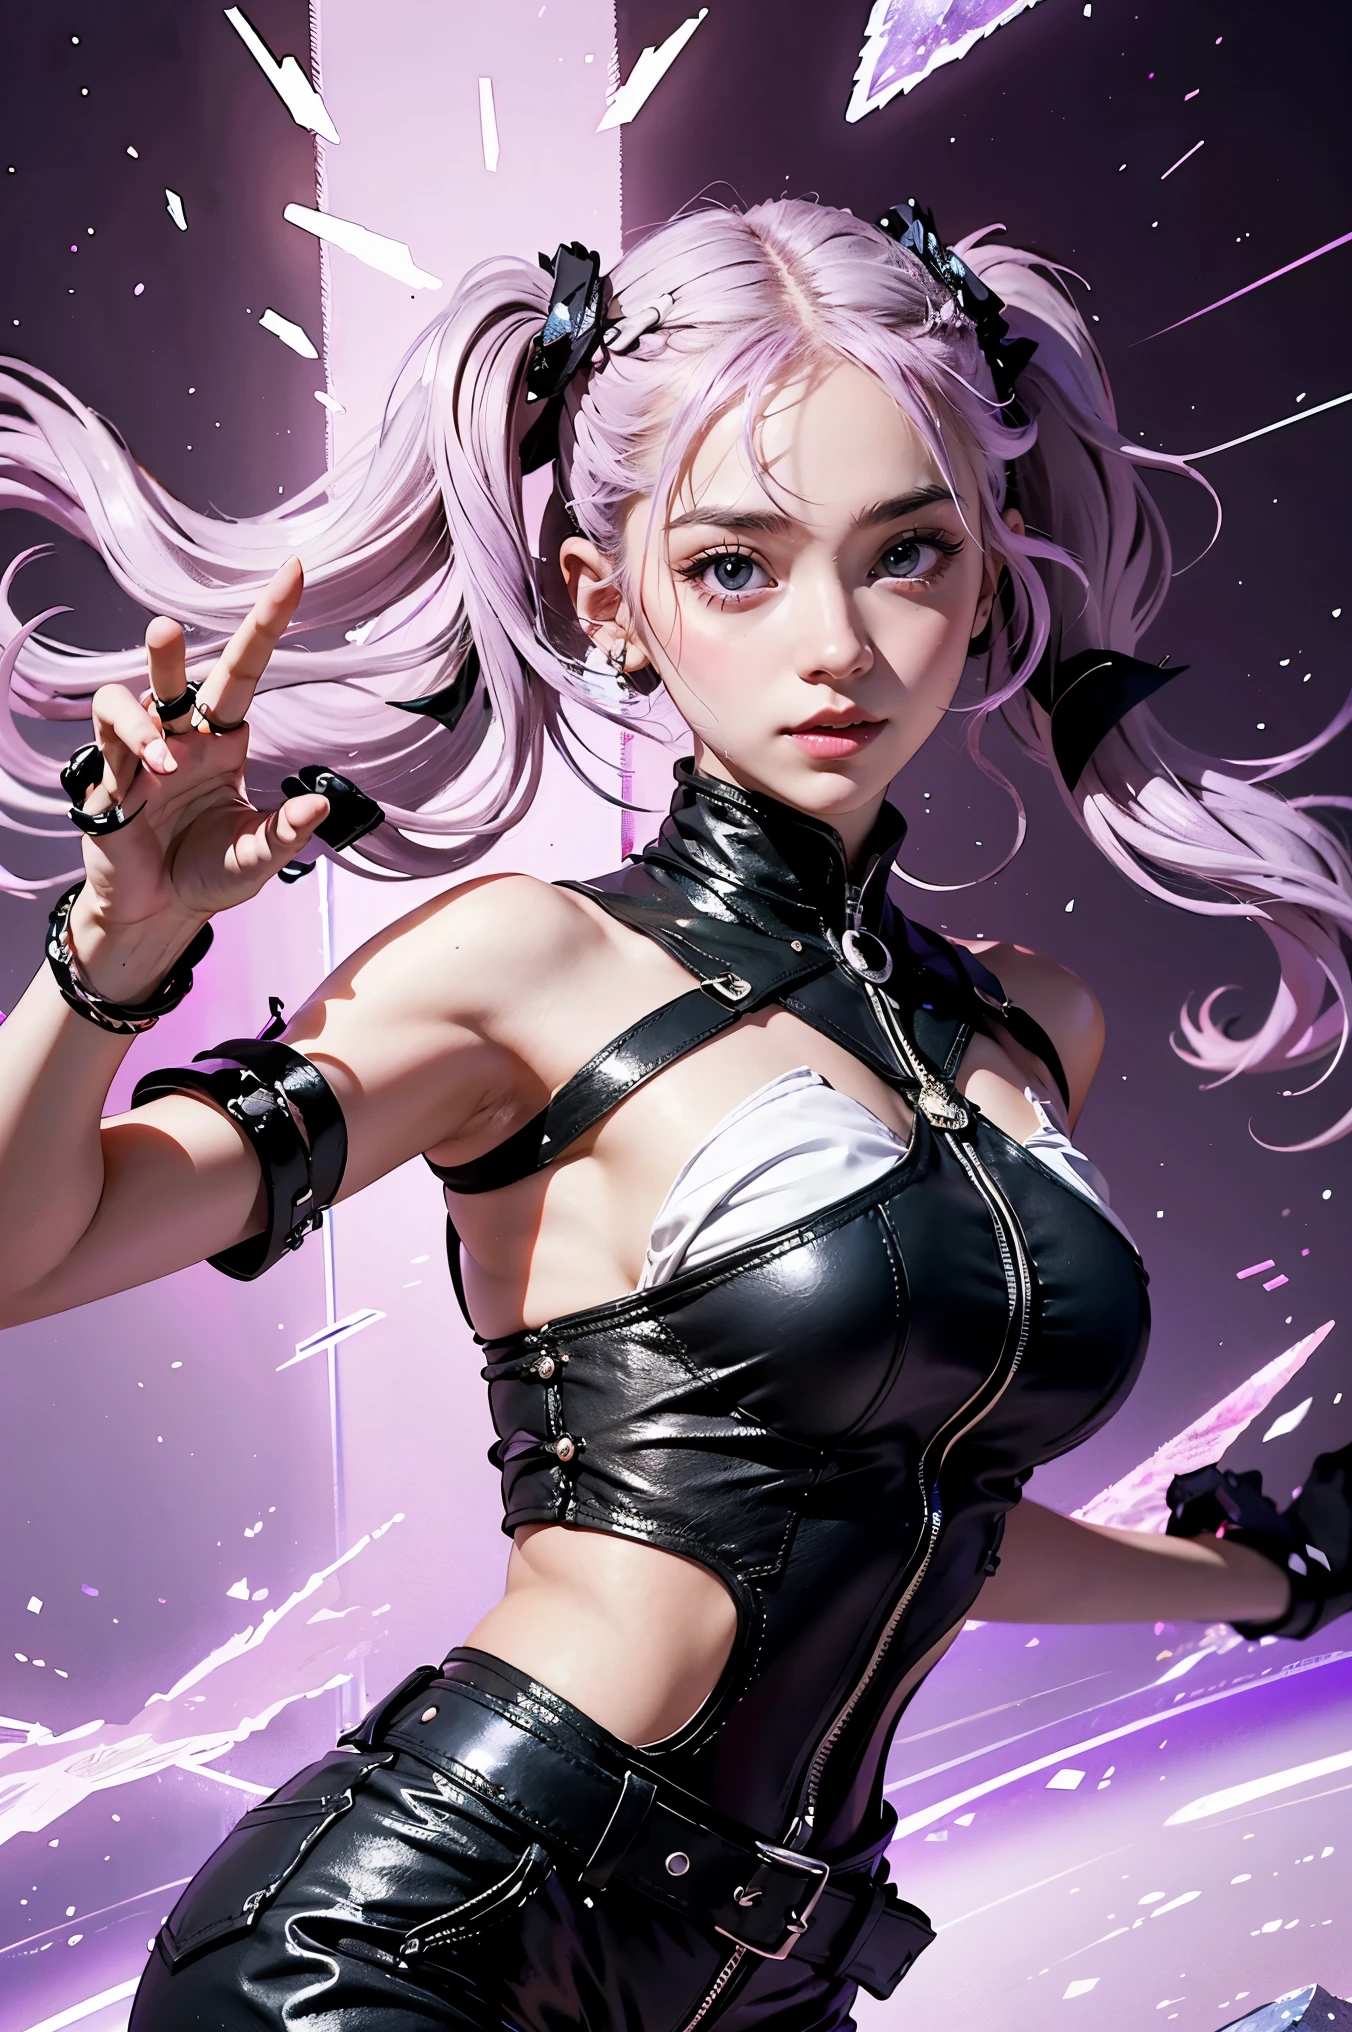 Best Quality, Ultra High Resolution, Cute, (KPOP Idol), (Long Twintail), (Light Purple Hair:1), ((Big Eyes)), Looking at you, BREAK ((upper body:1.3)), Front View,A character with long, flowing silver hair and a slender build, wearing a black and white outfit that includes thigh-high boots and gloves. The character is in a dynamic pose surrounded by ethereal purple crystals and energy, The character is in a dynamic pose surrounded by ethereal purple crystals and energy,A character with long, flowing purple hair, wearing a metallic top and black shorts with thigh-high boots. The outfit includes straps and belts, giving it a futuristic or fantasy style. The character is in a dynamic pose with radiant light or energy surrounding them, set against a minimalistic abstract background,